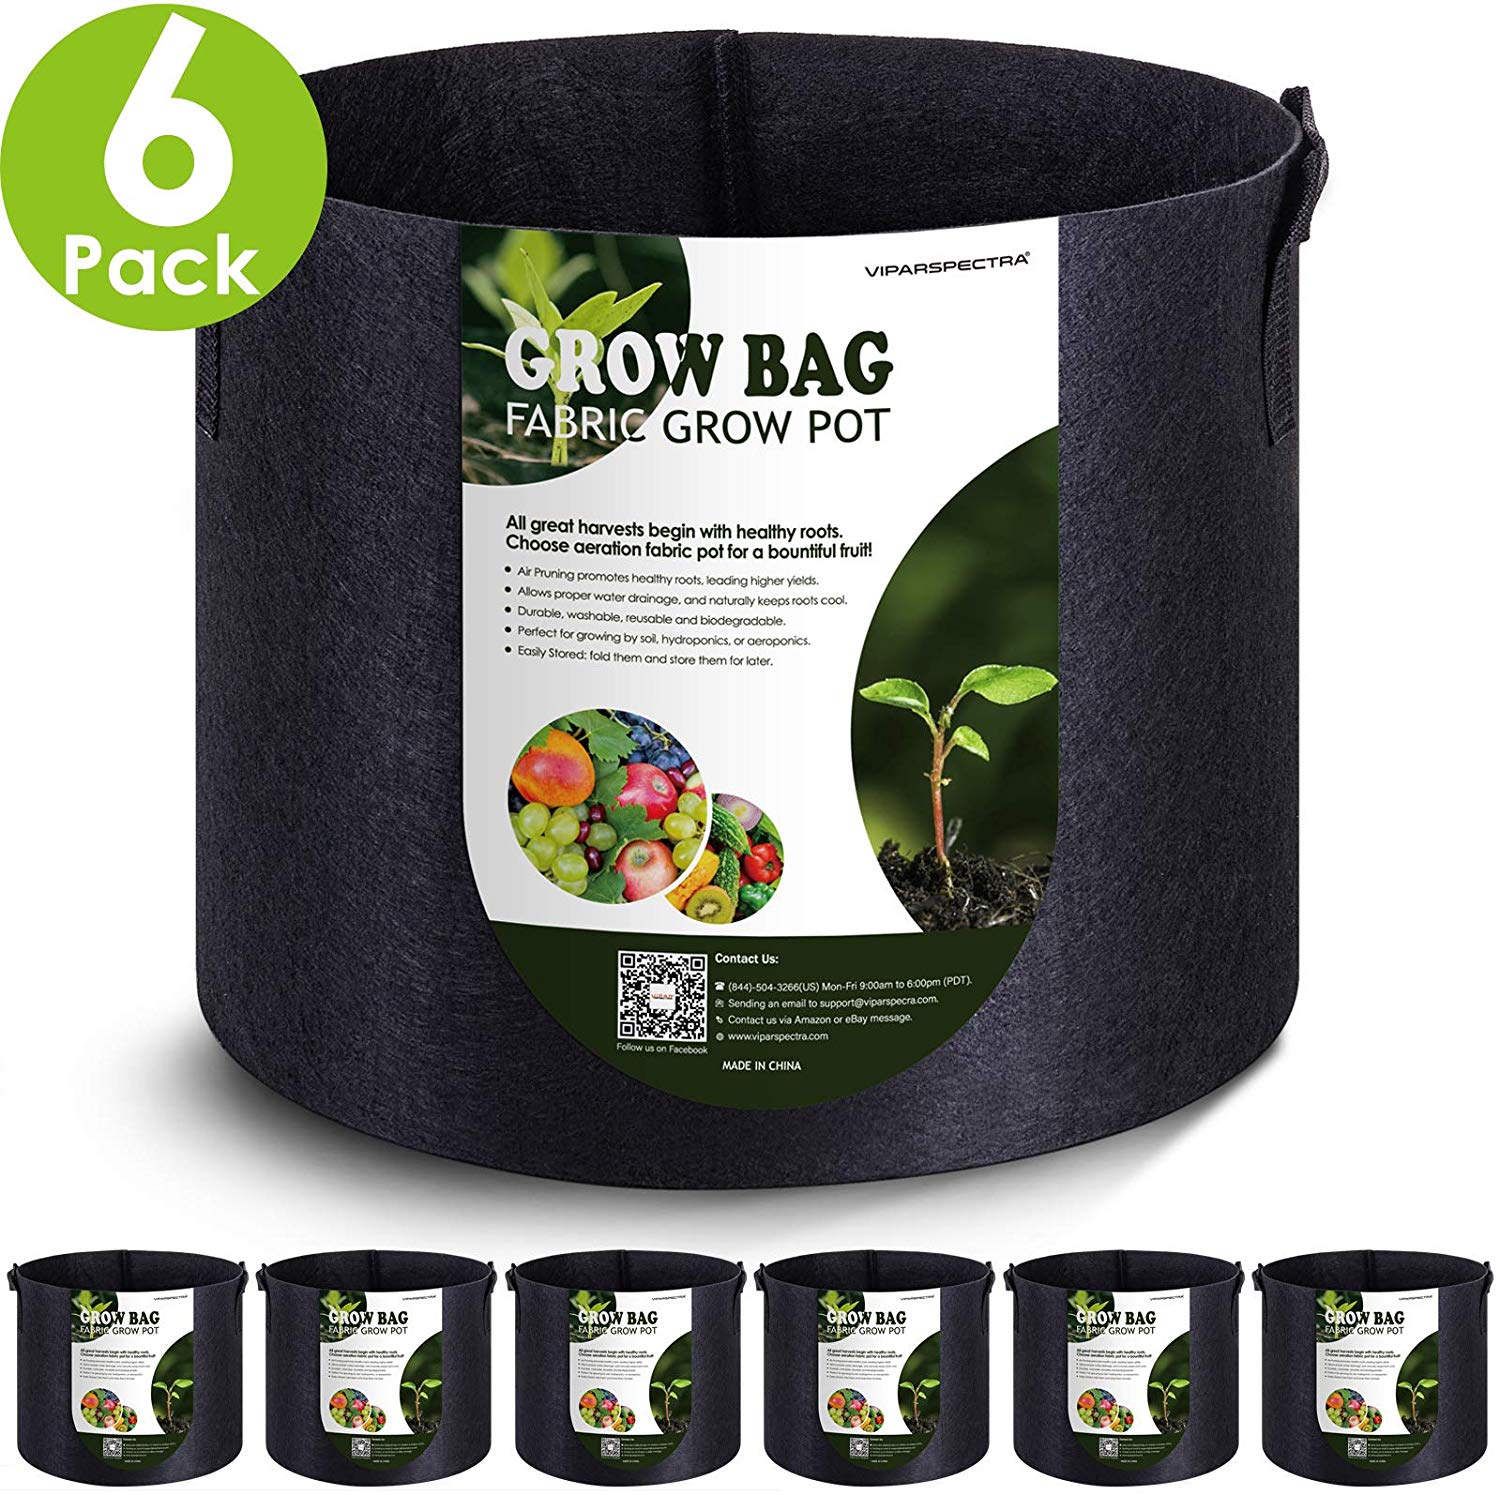 Details about   3/6 Pack Plant Grow Bags Heavy Duty Non-Woven Aeration Fabric Bags Pot Container 